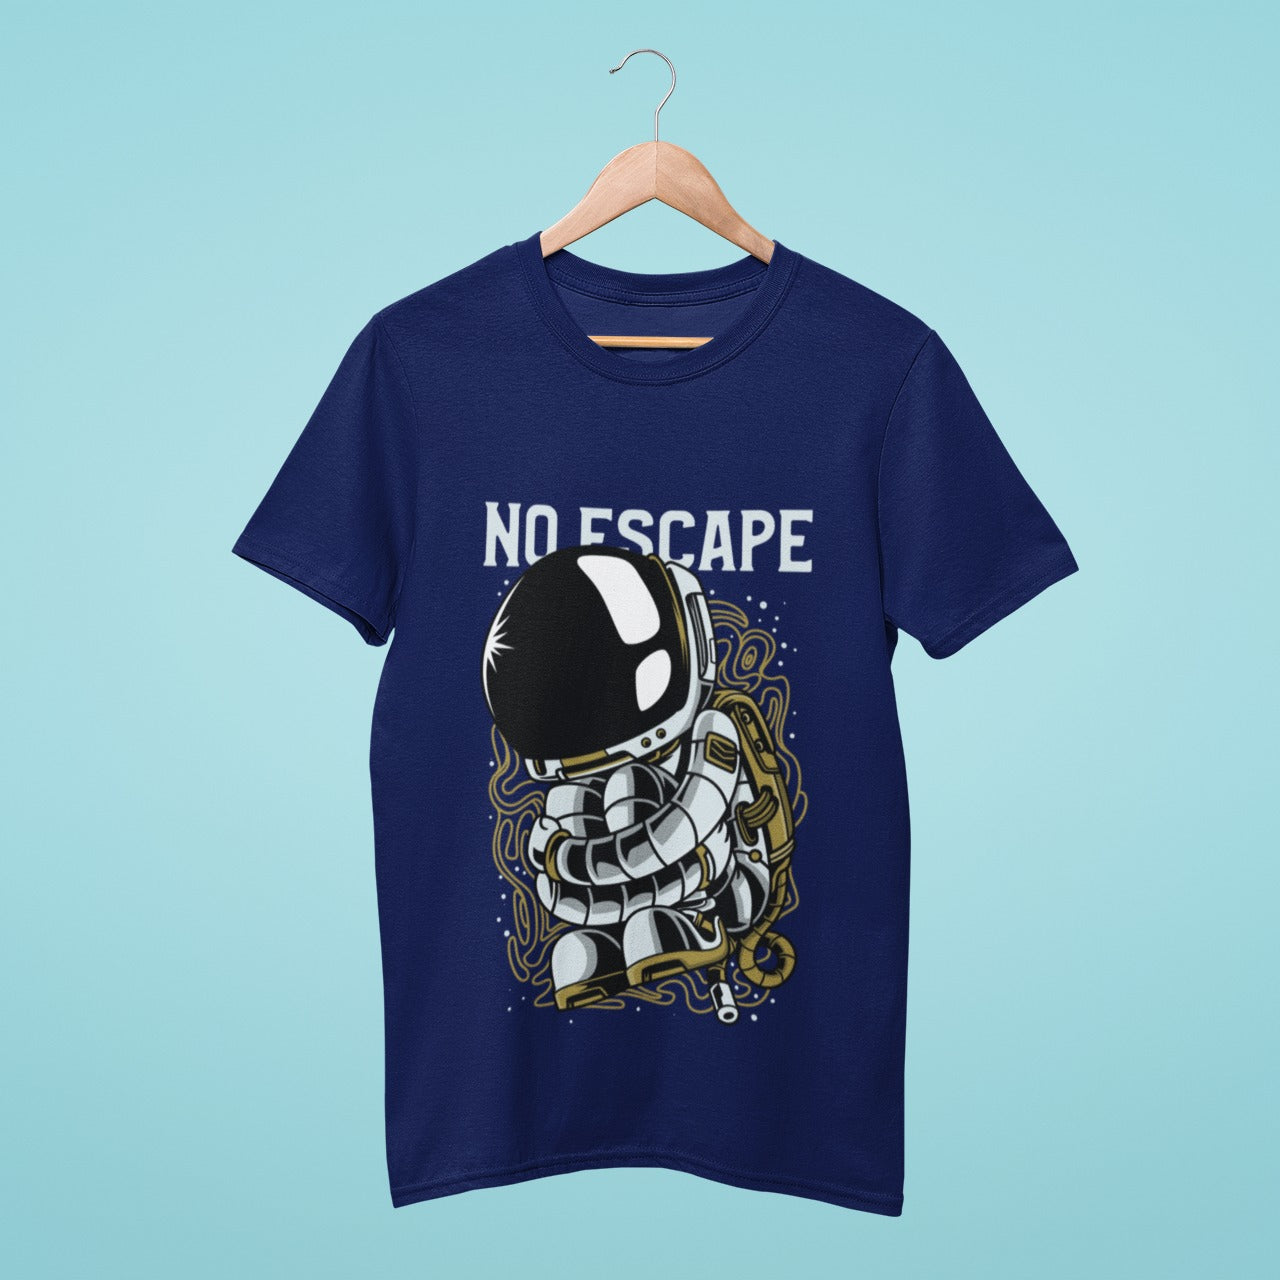 Introducing the "No Escape" t-shirt in cool blue color. Featuring an astronaut in a curled-up position floating in space, this shirt is perfect for anyone with an adventurous spirit. Whether you're an astronaut yourself or just a fan of space exploration, this t-shirt is sure to be a hit. Get yours today and show your love for the final frontier.